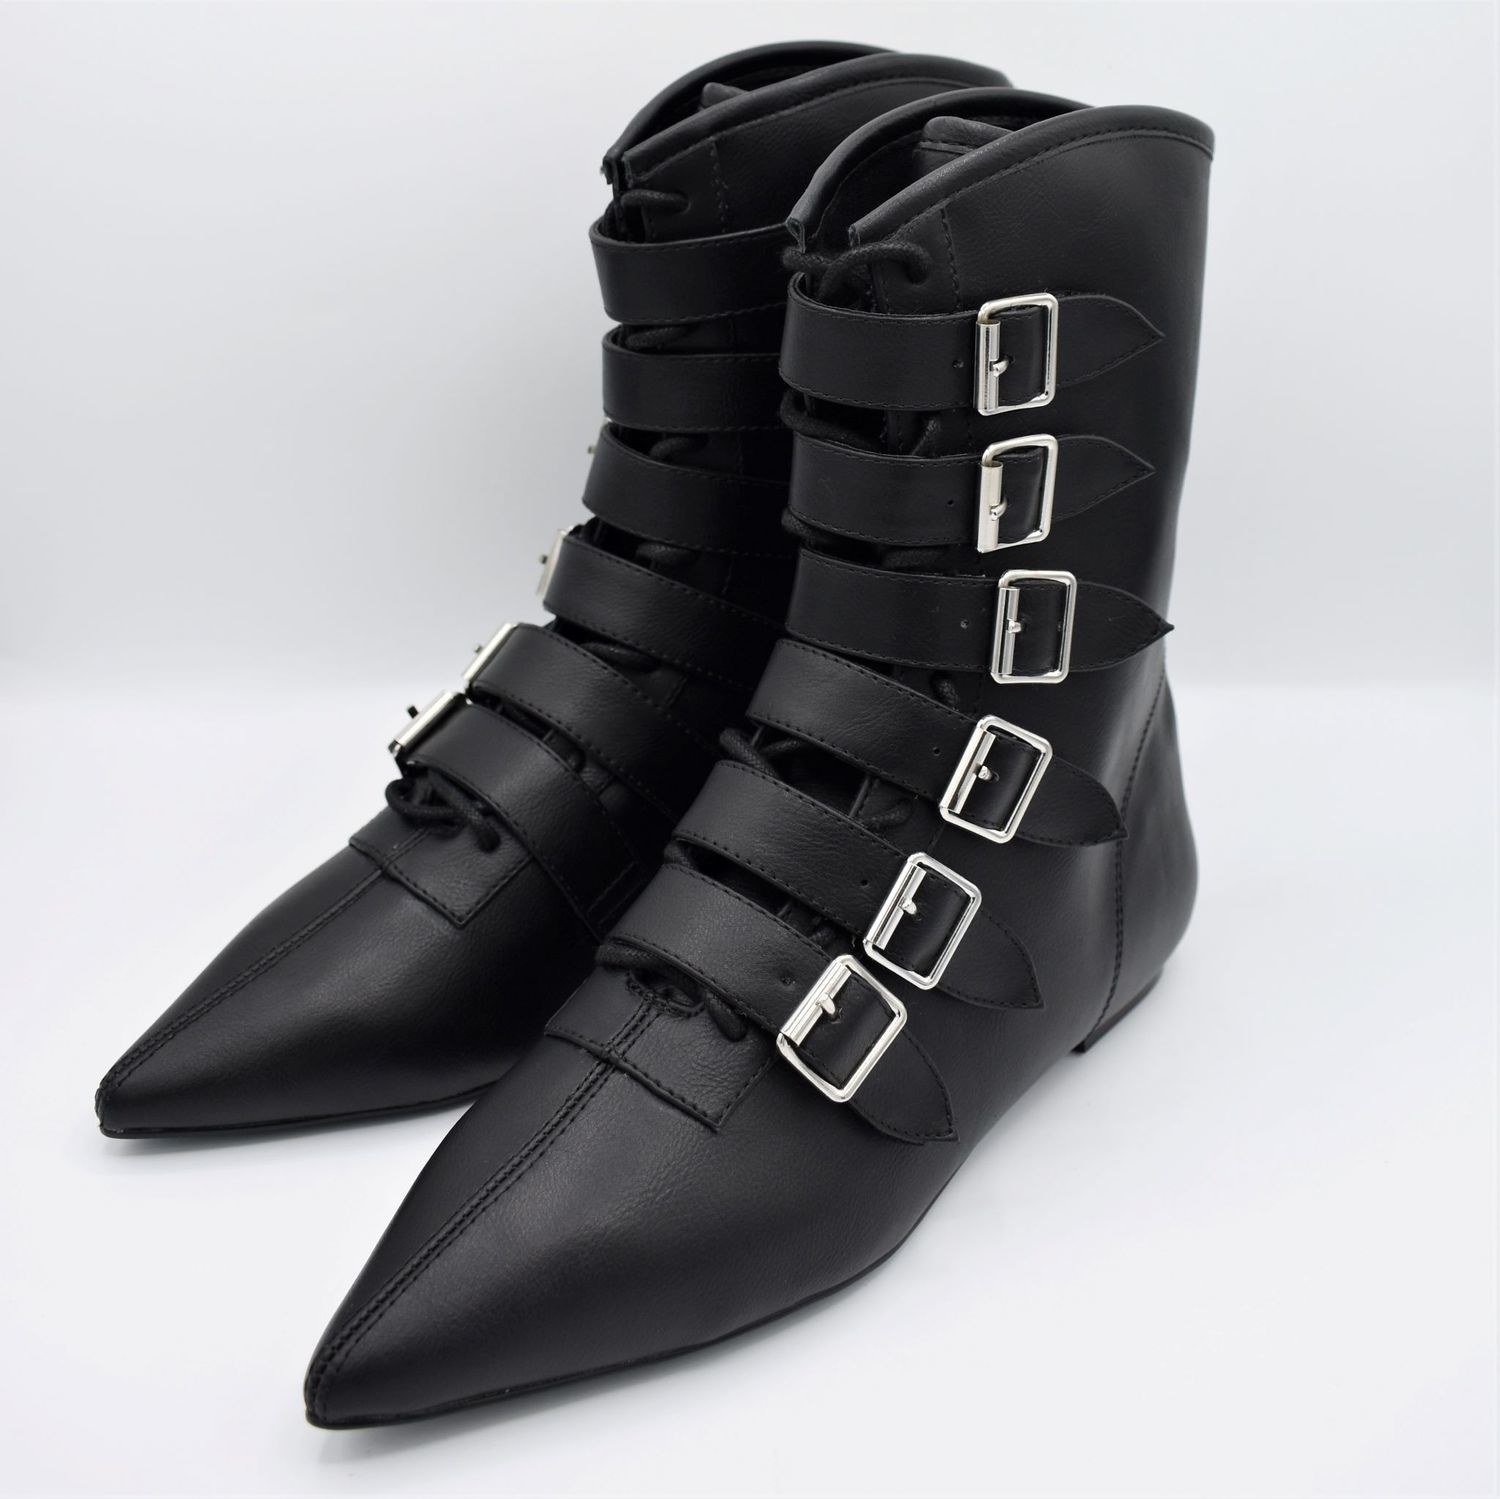 black shoe with a pointy toe and many buckle clasps